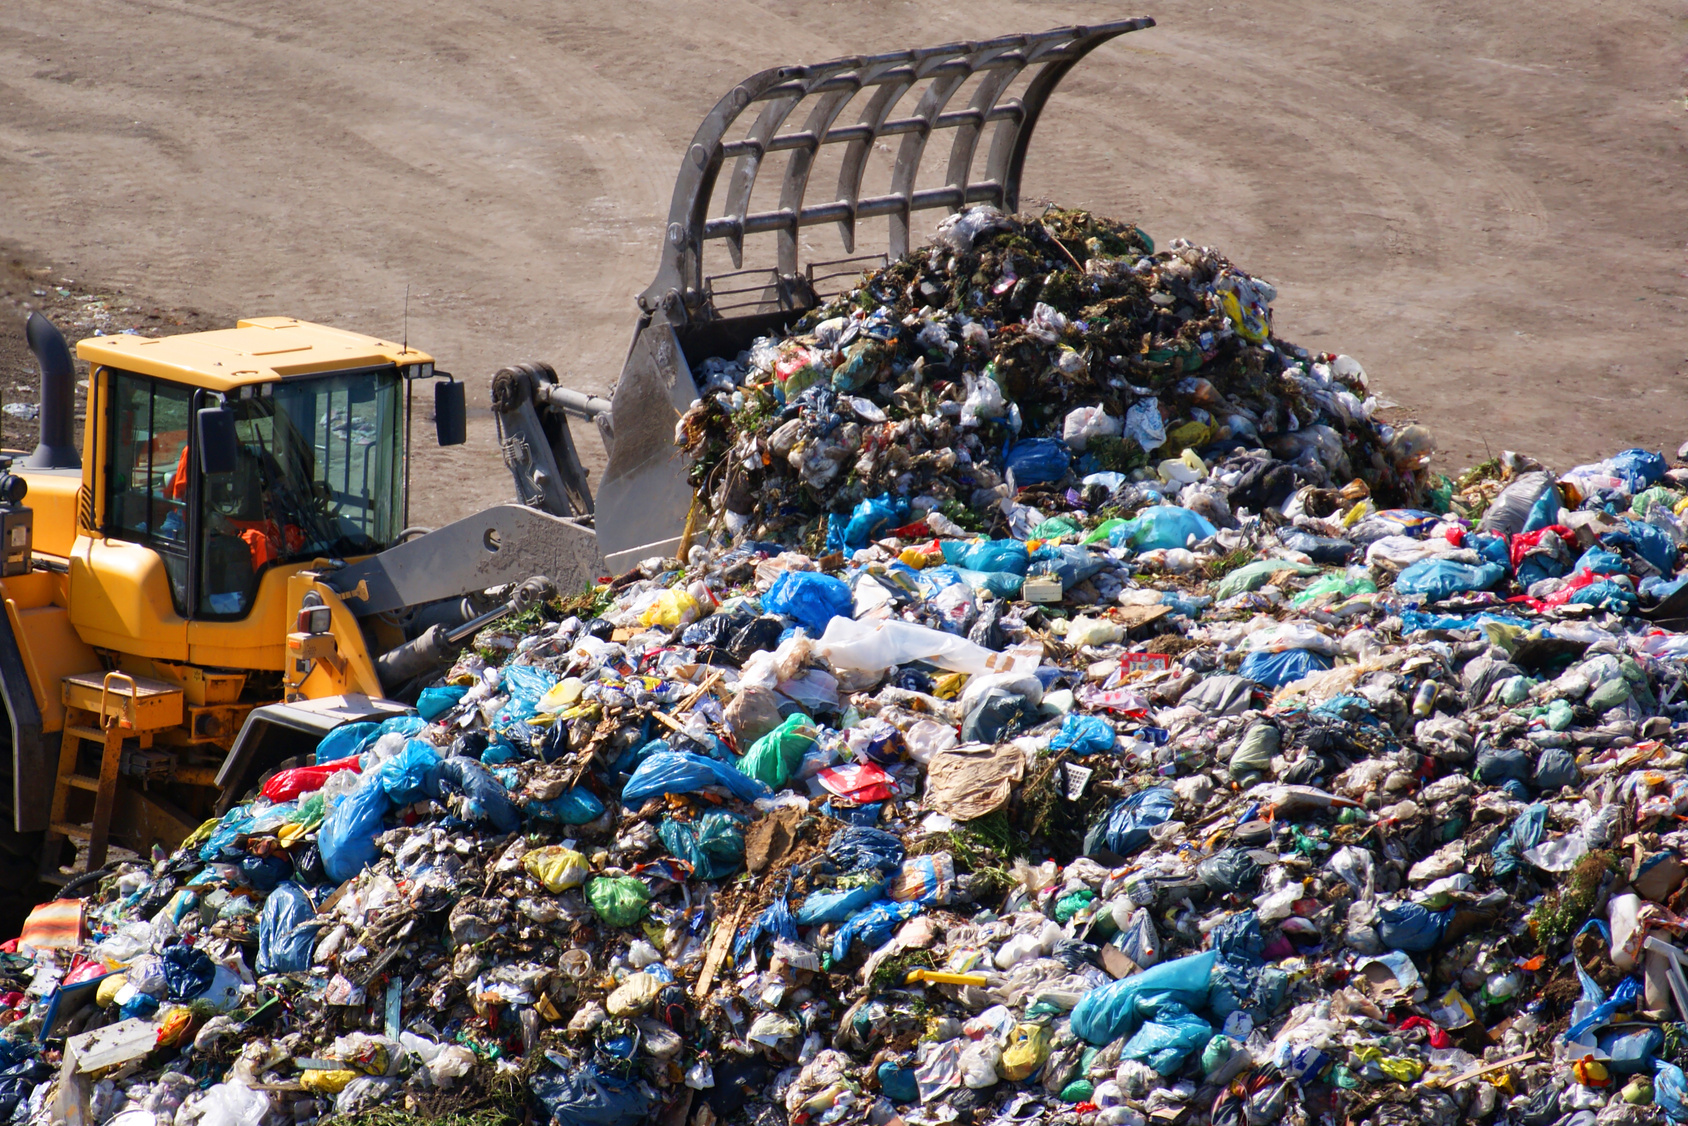 A backhoe pushes together the waste of the waste landfill